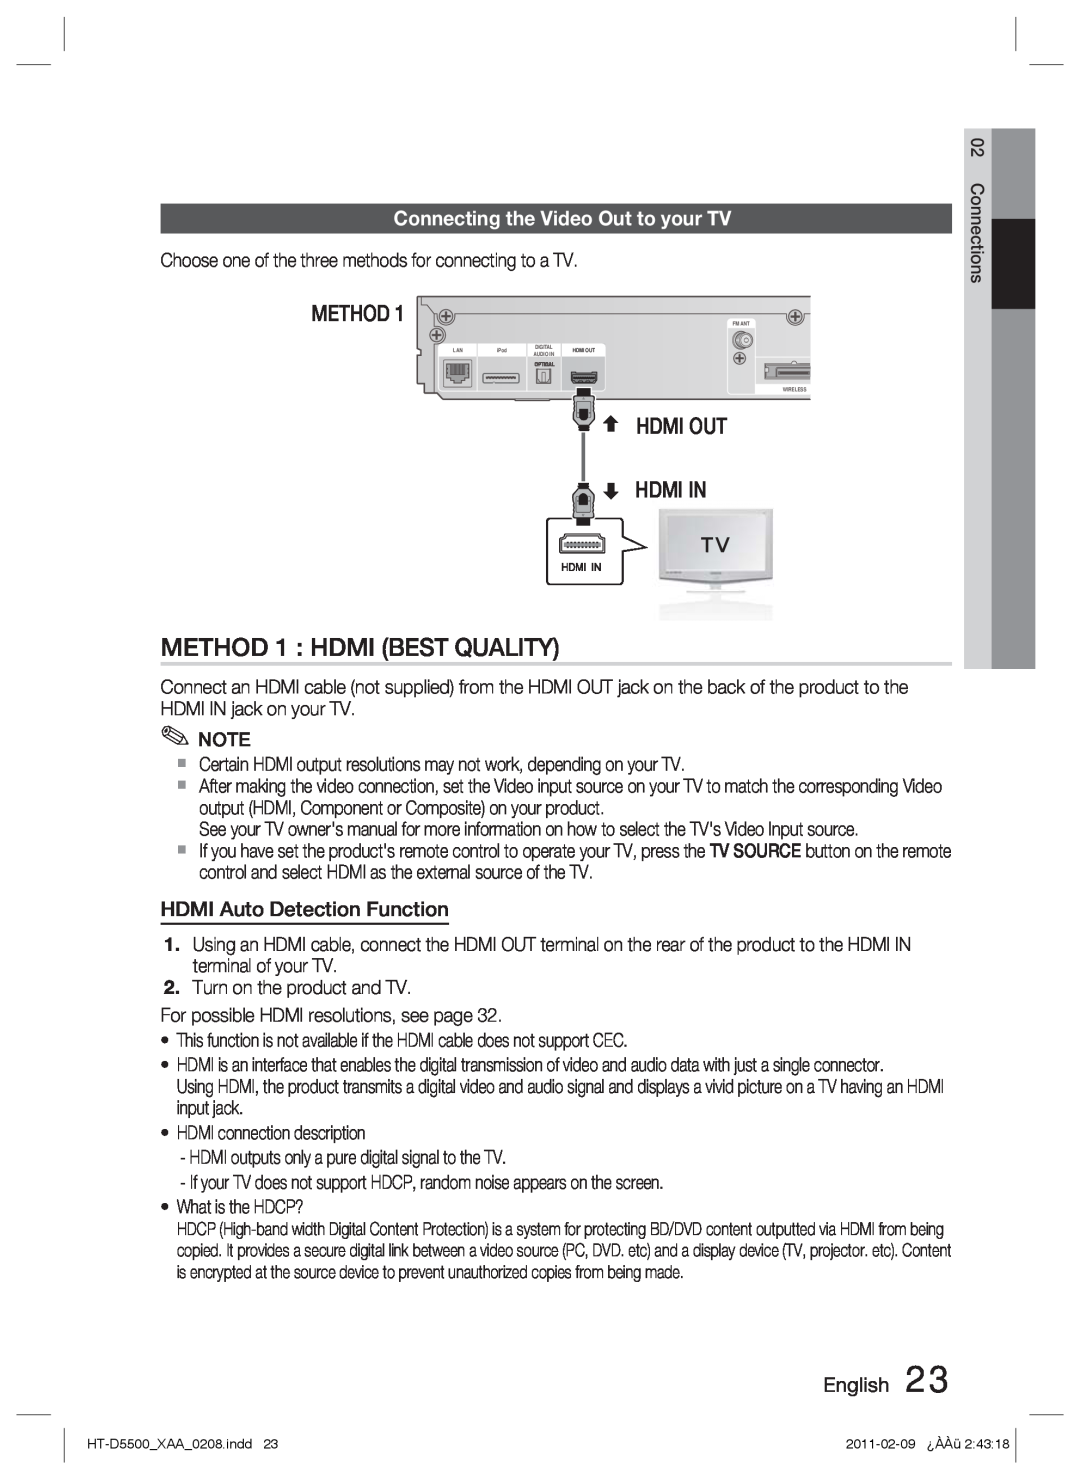 Samsung D5500 user manual METHOD 1 : HDMI BEST QUALITY, Method, Hdmi Out Hdmi In, Connecting the Video Out to your TV 